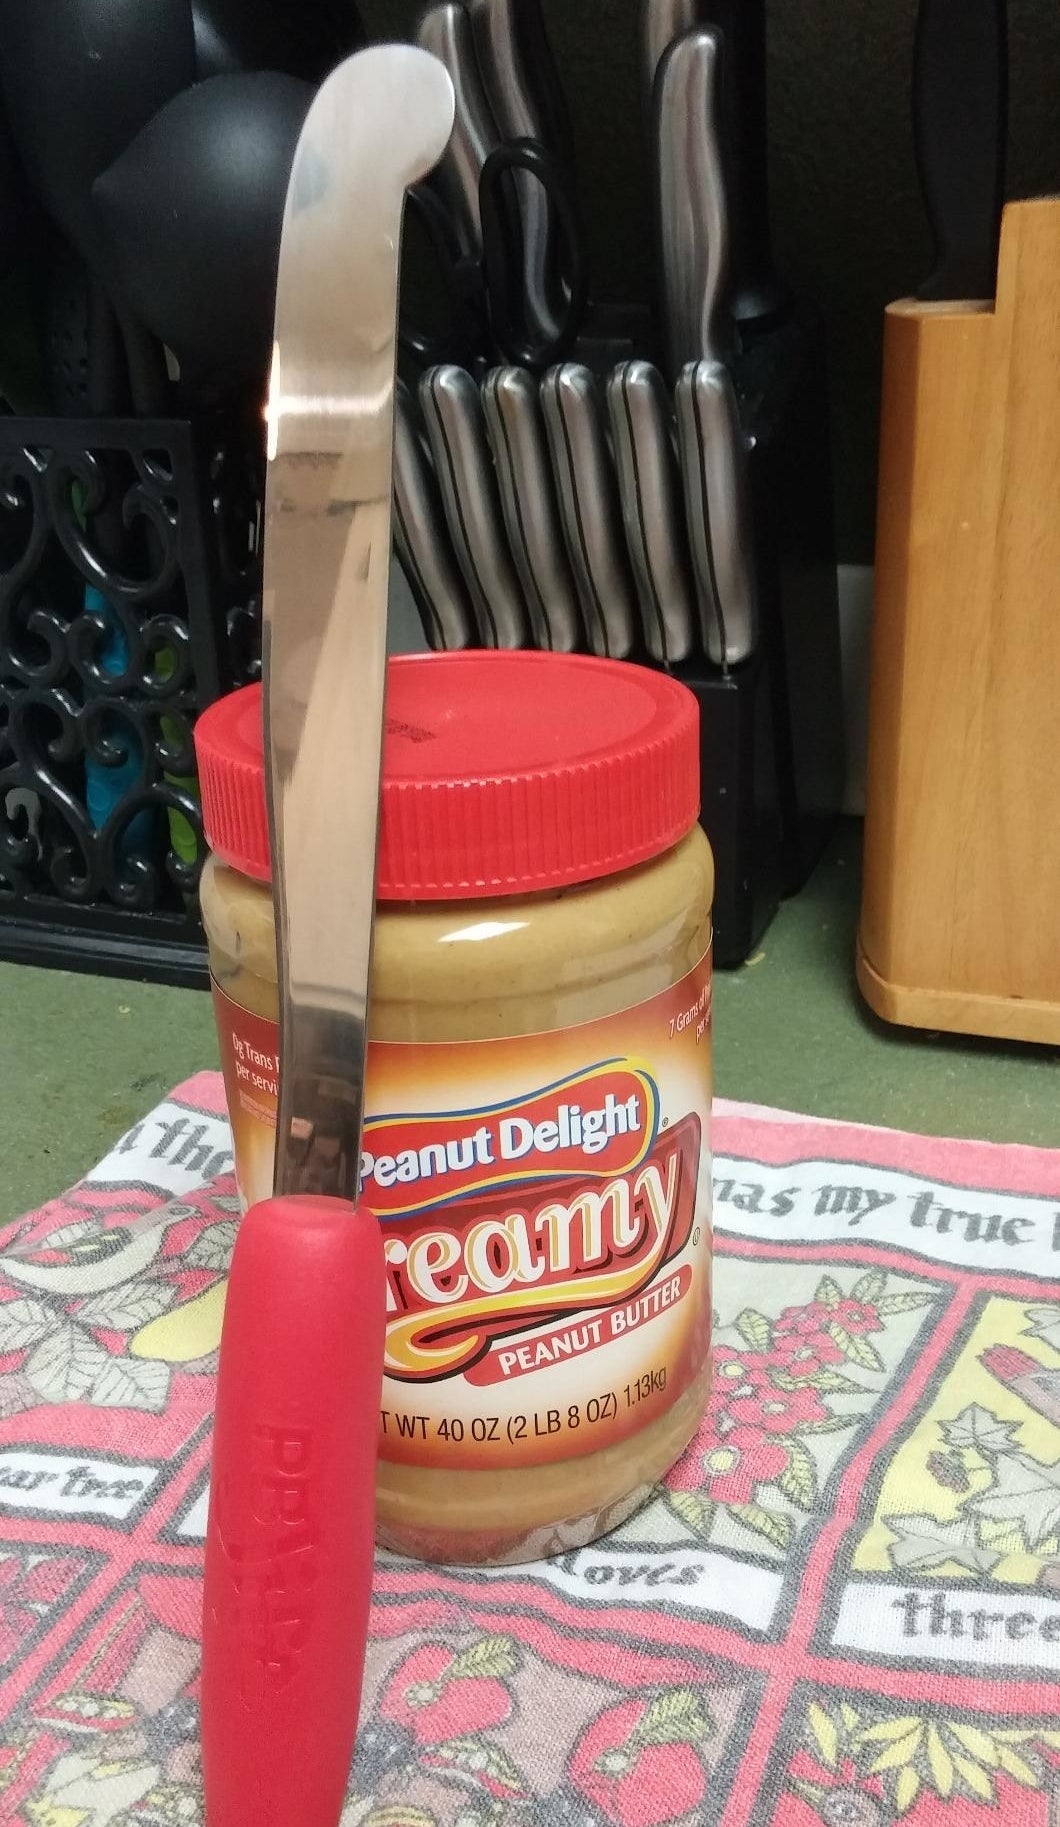 The peanut butter knife